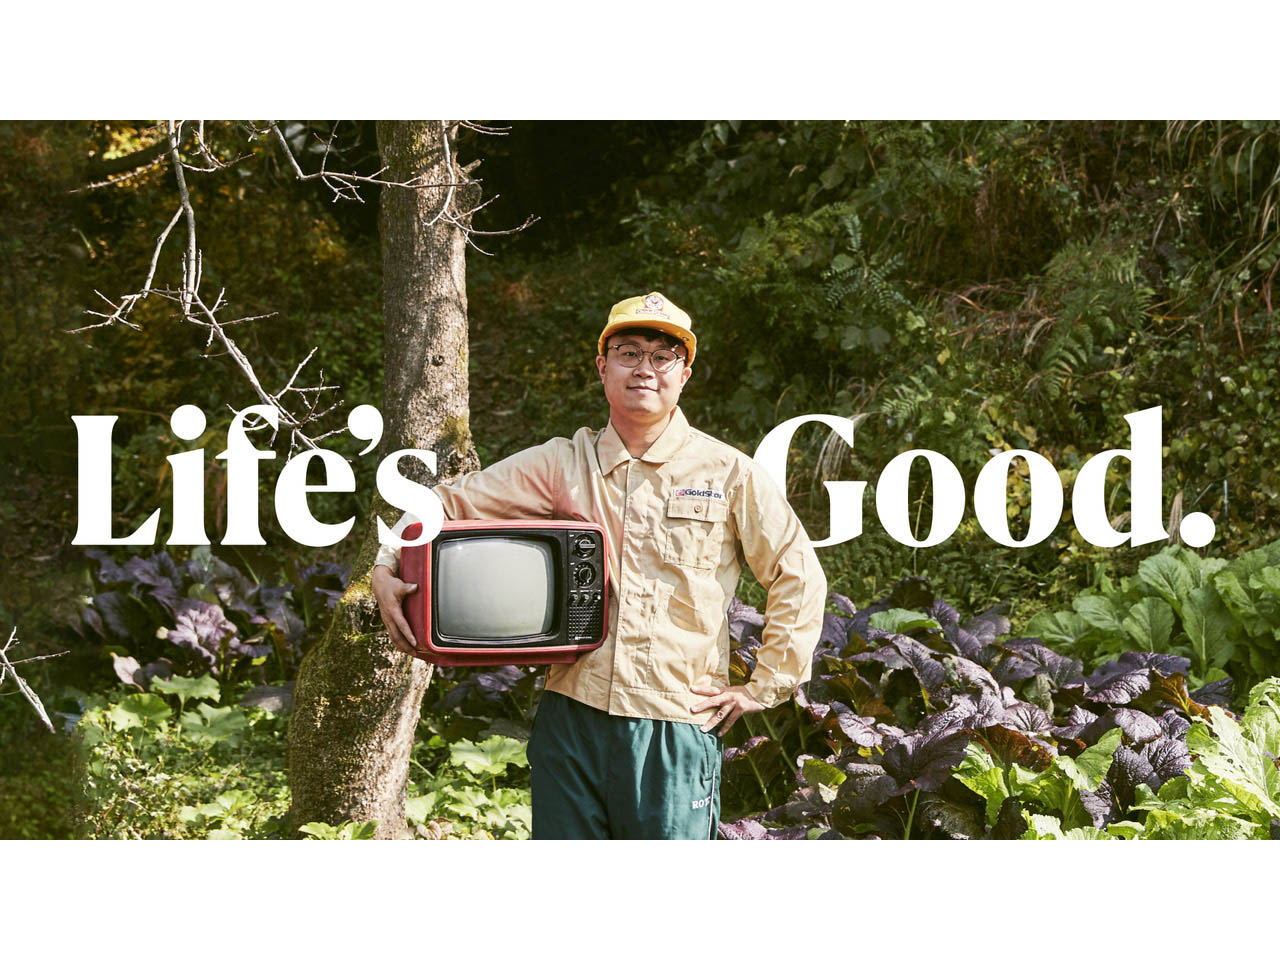 LG Electronics kicks off ‘Life's Good’ global campaign, with a message of optimism and a refreshed brand identity by Wolff Olins